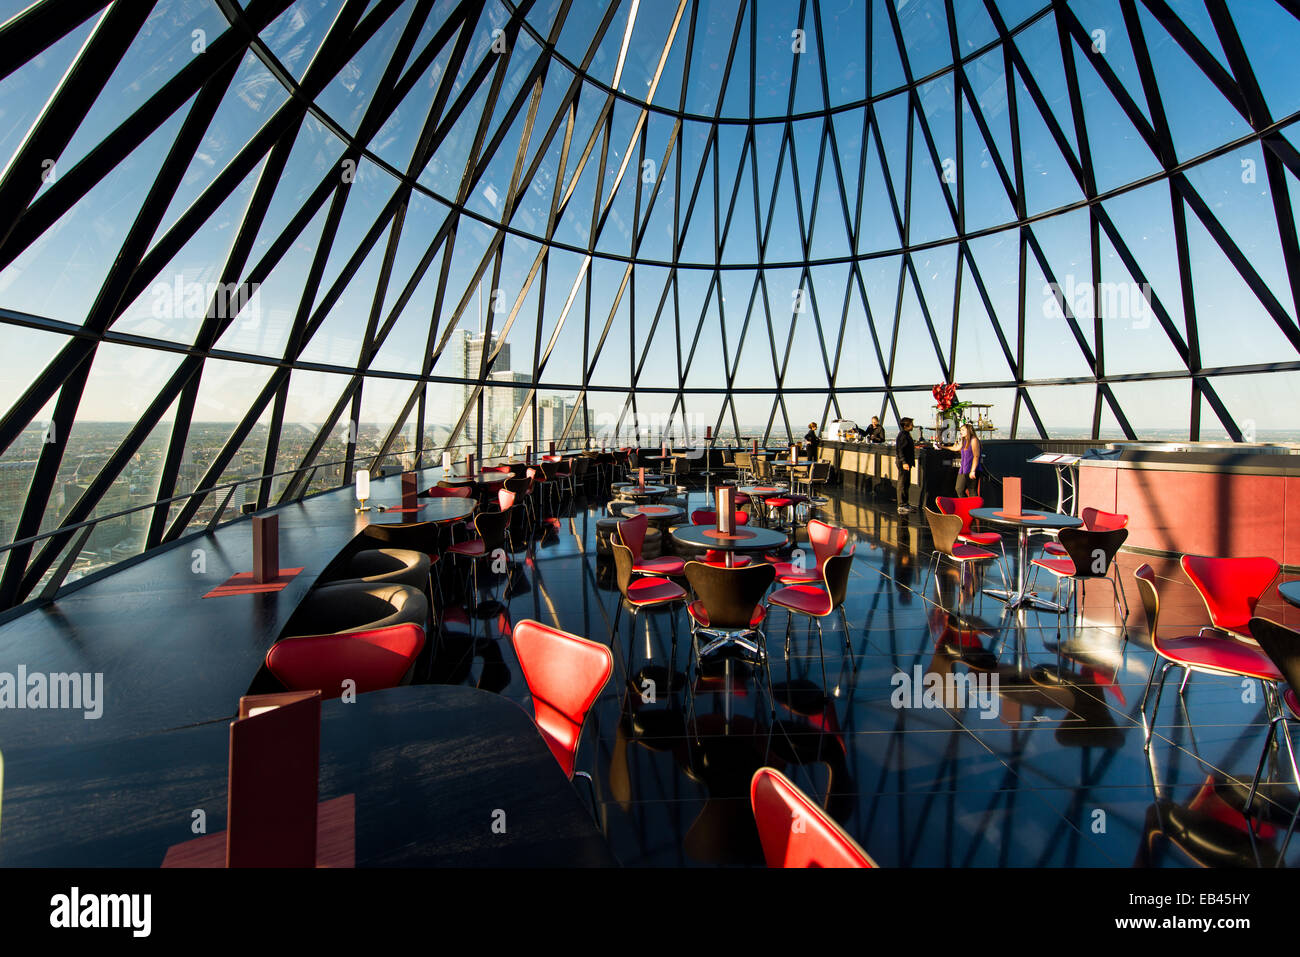 Interior of the Searcys restaurant and entertaining space at 30 St Mary Axe in London, otherwise known as The Gherkin, designed Stock Photo